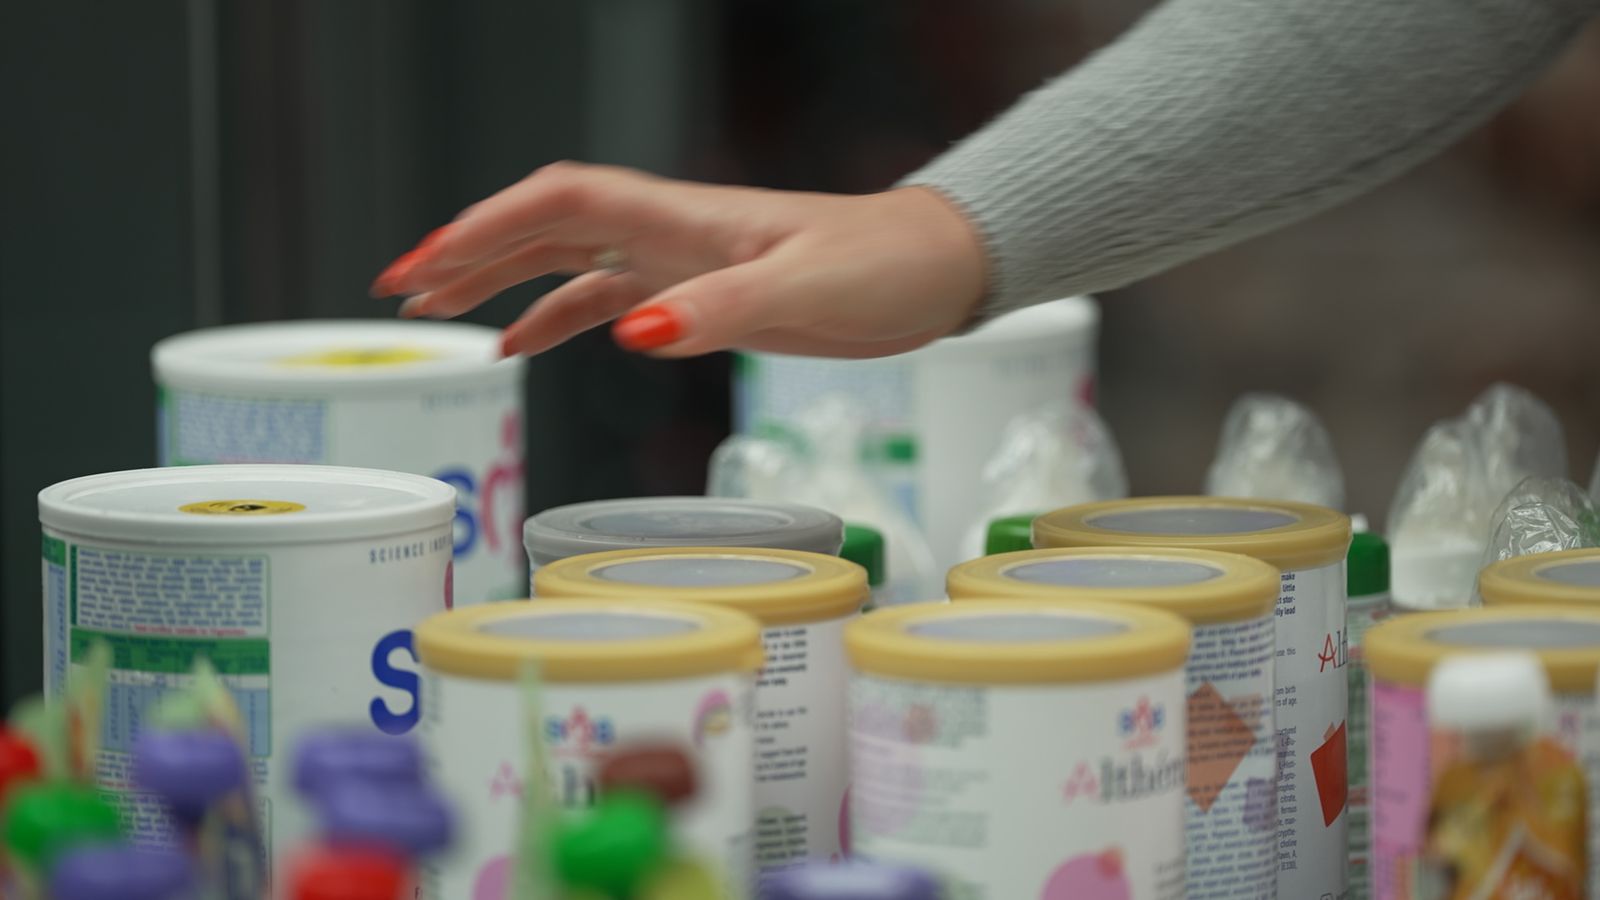 Labour says it would move to ease 'heartbreaking' baby formula price crisis